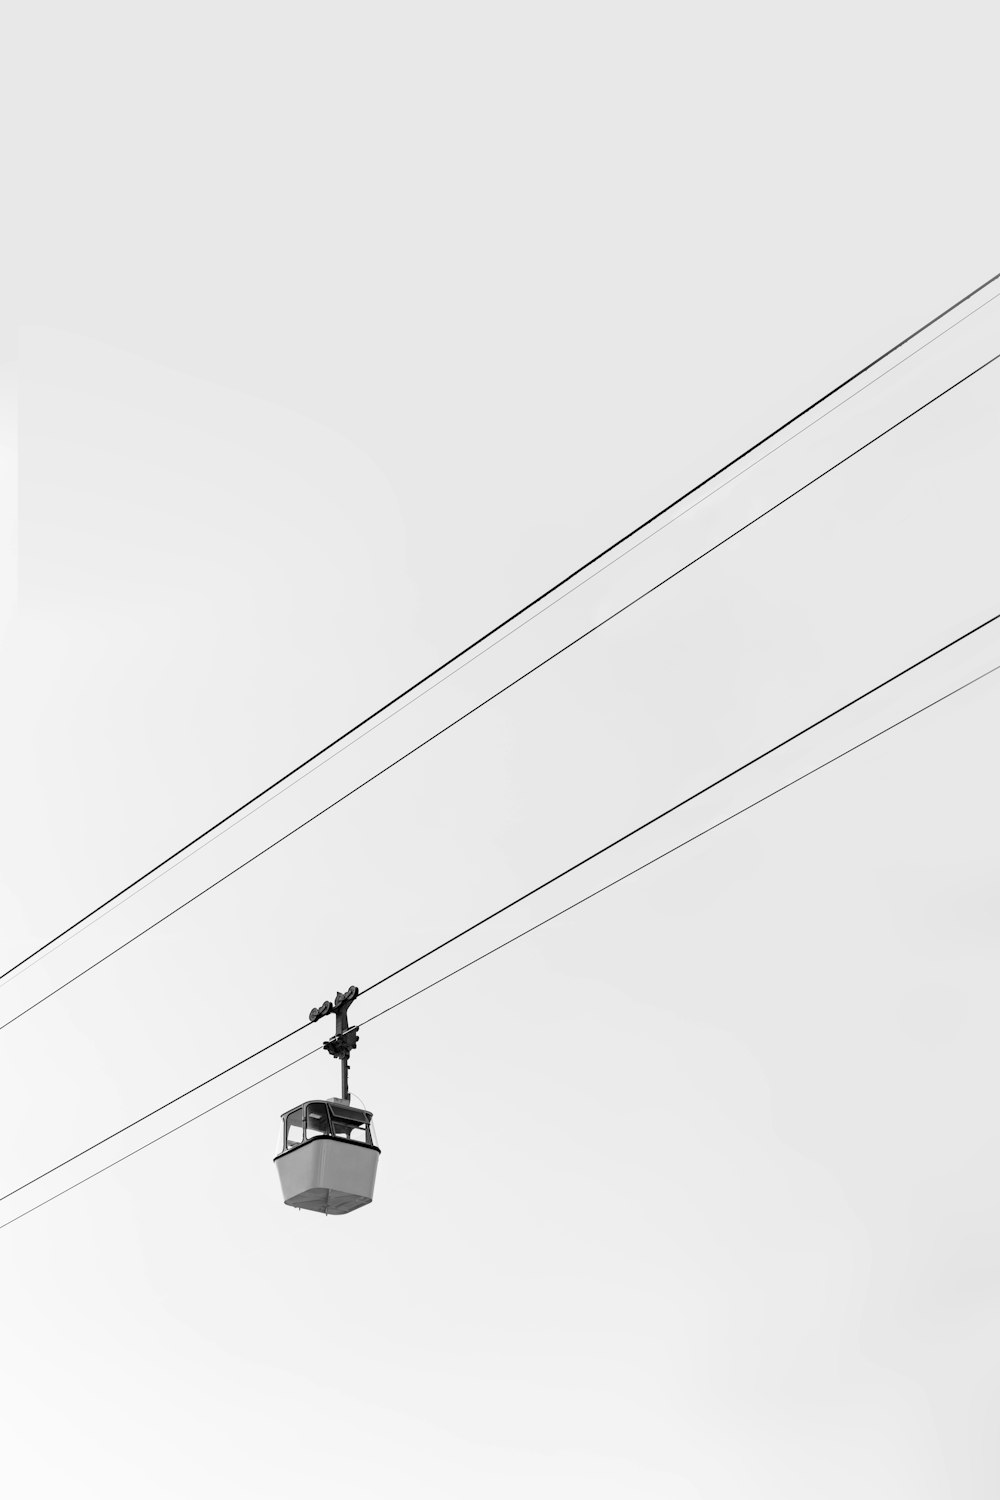 white cable car under white sky